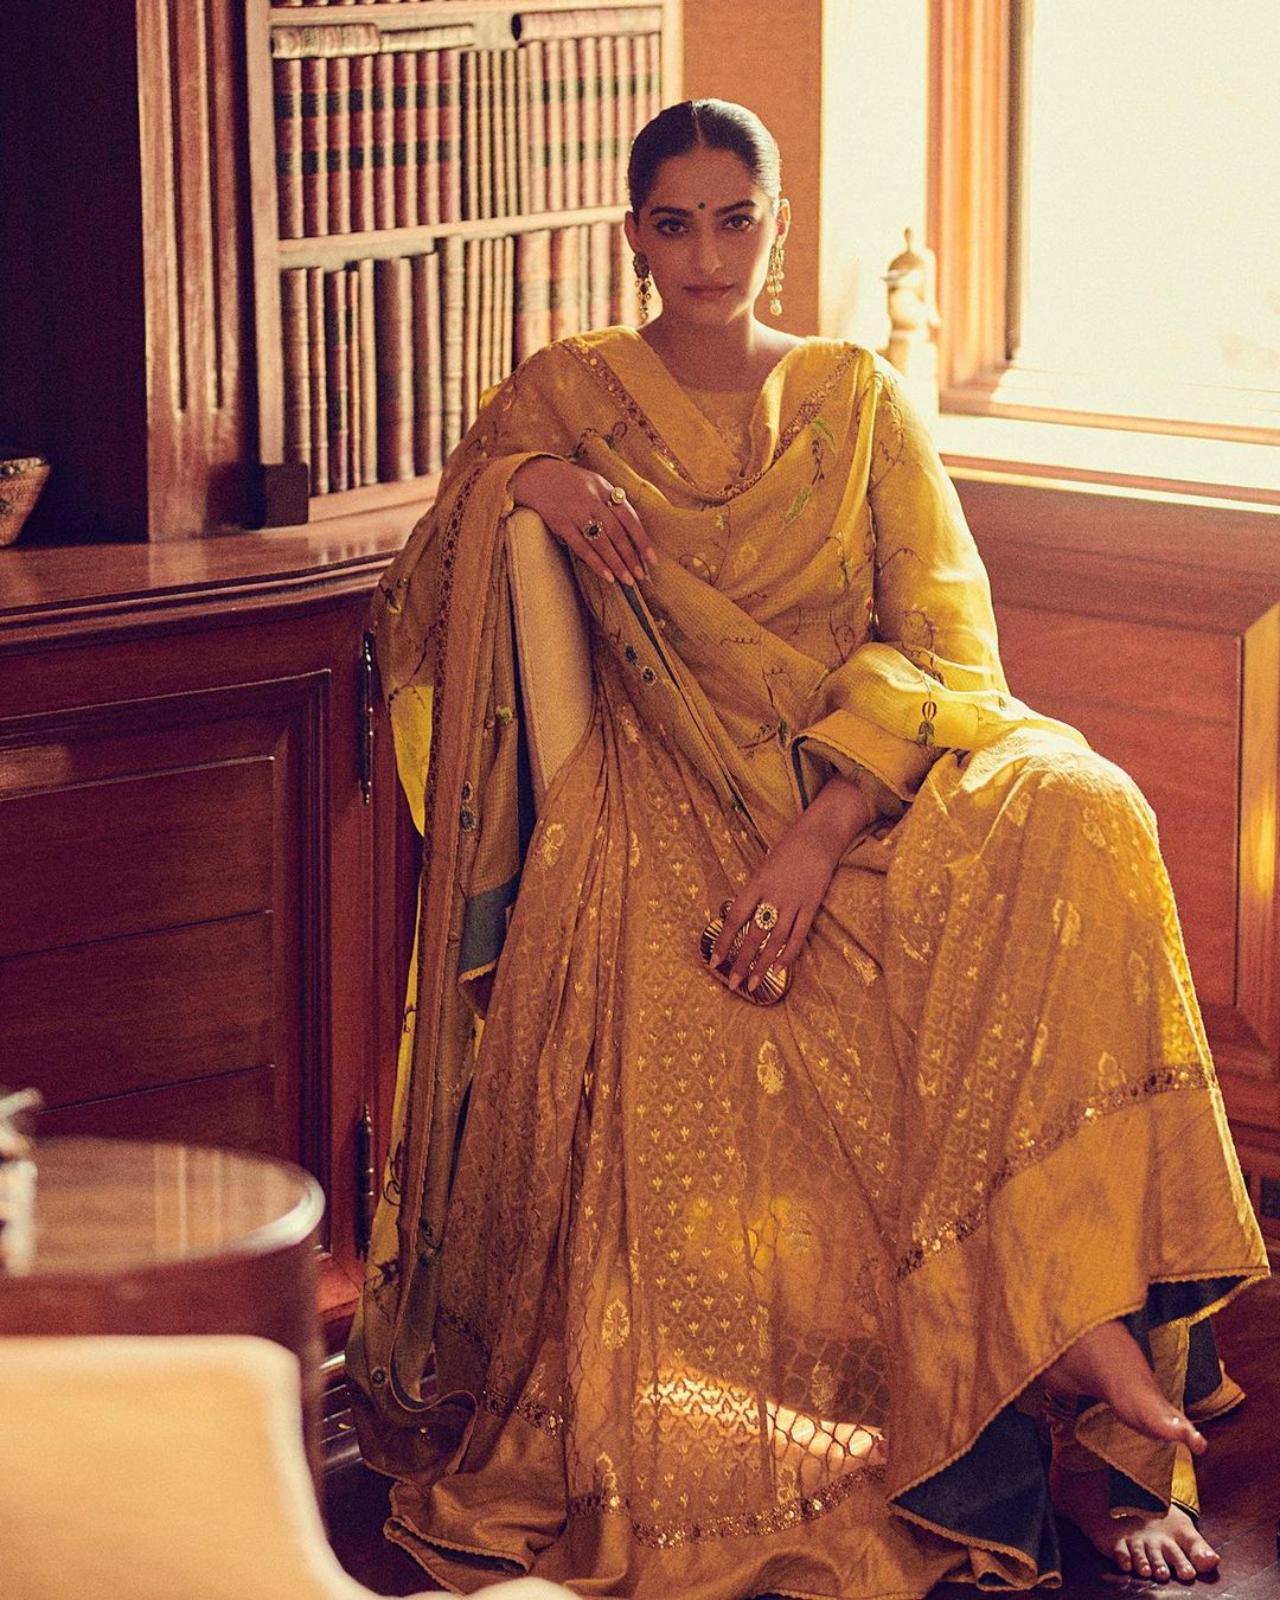 Dazzles in anarkali
From Western outfits to traditional ones, Sonam knows how to carry them with perfection. The actress looked stunning in yellow anarkali with a golden print. Along with it, she chooses a pink dupatta that was embellished with mirror work. She accessorised her ethnic style with dangling earrings and several gold rings